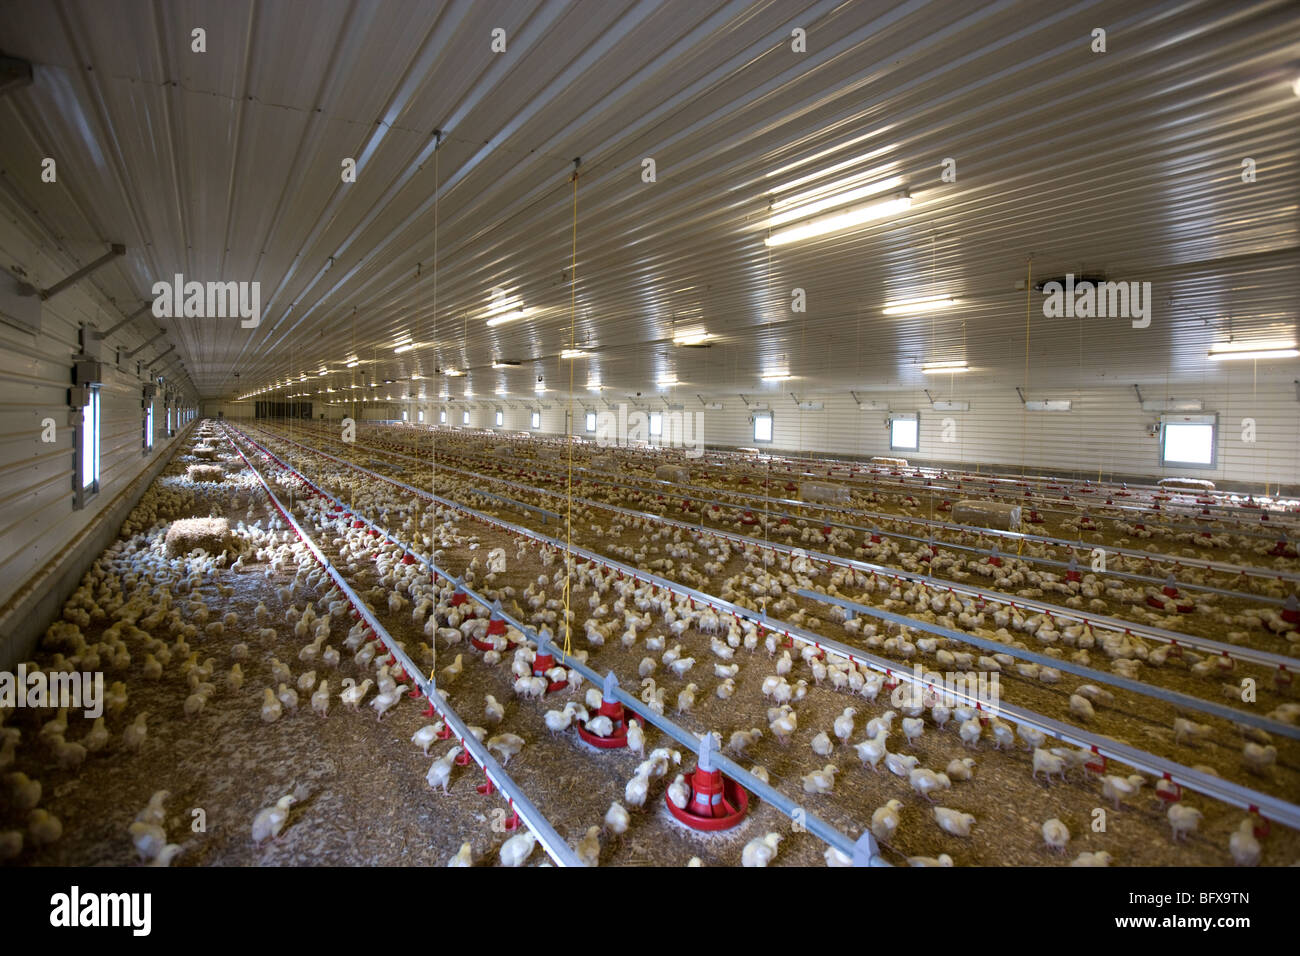 Inside a Chicken Shed Stock Photo